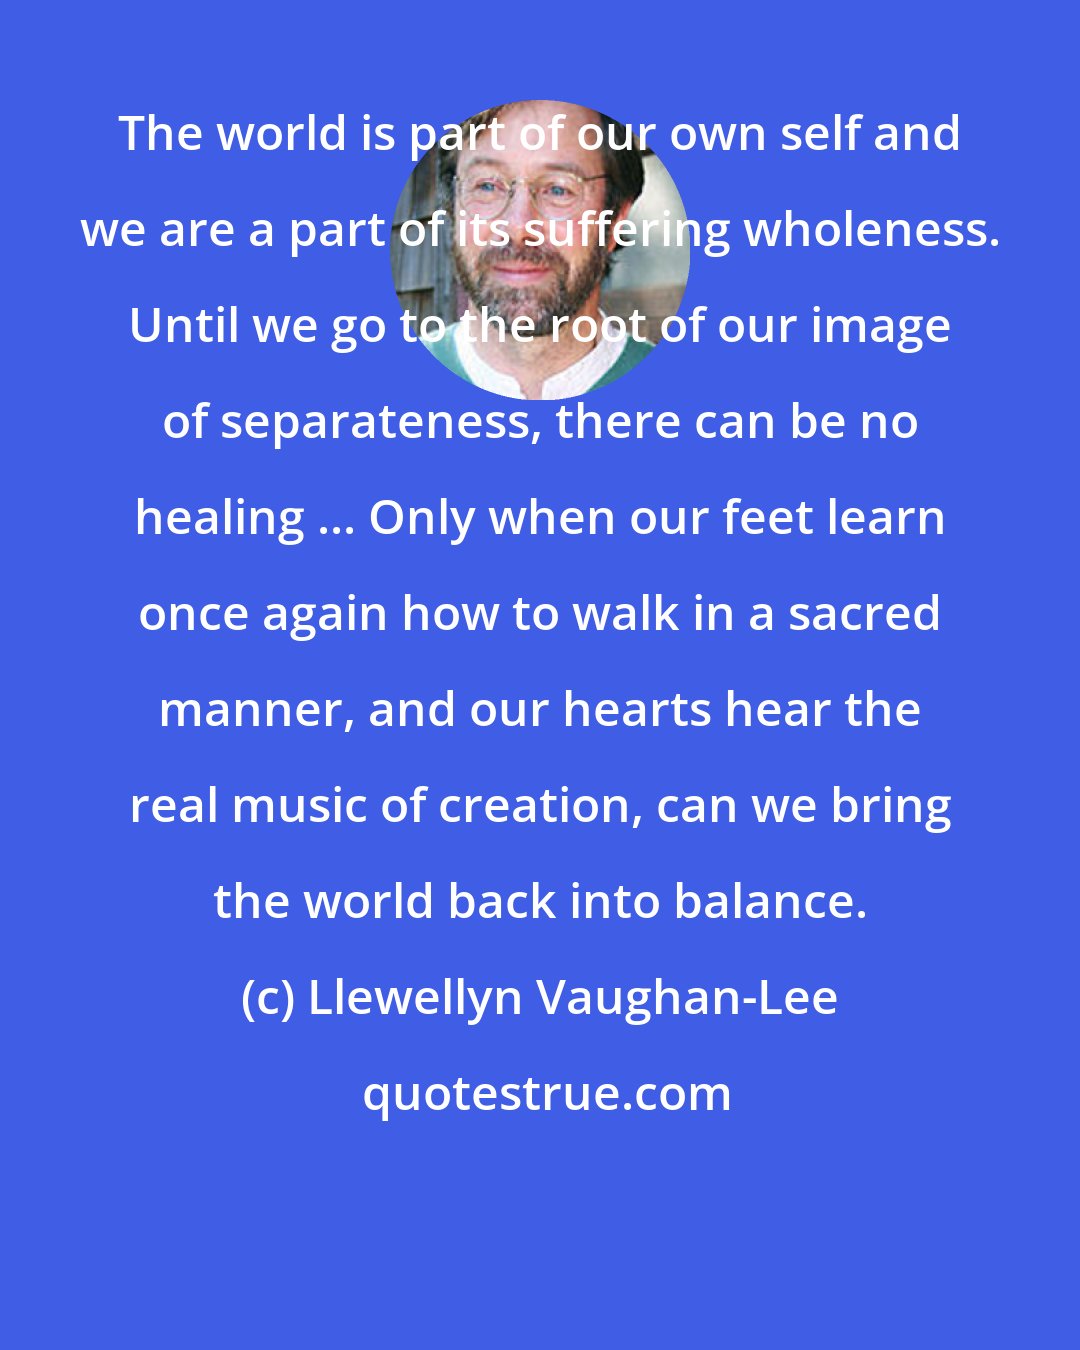 Llewellyn Vaughan-Lee: The world is part of our own self and we are a part of its suffering wholeness. Until we go to the root of our image of separateness, there can be no healing ... Only when our feet learn once again how to walk in a sacred manner, and our hearts hear the real music of creation, can we bring the world back into balance.